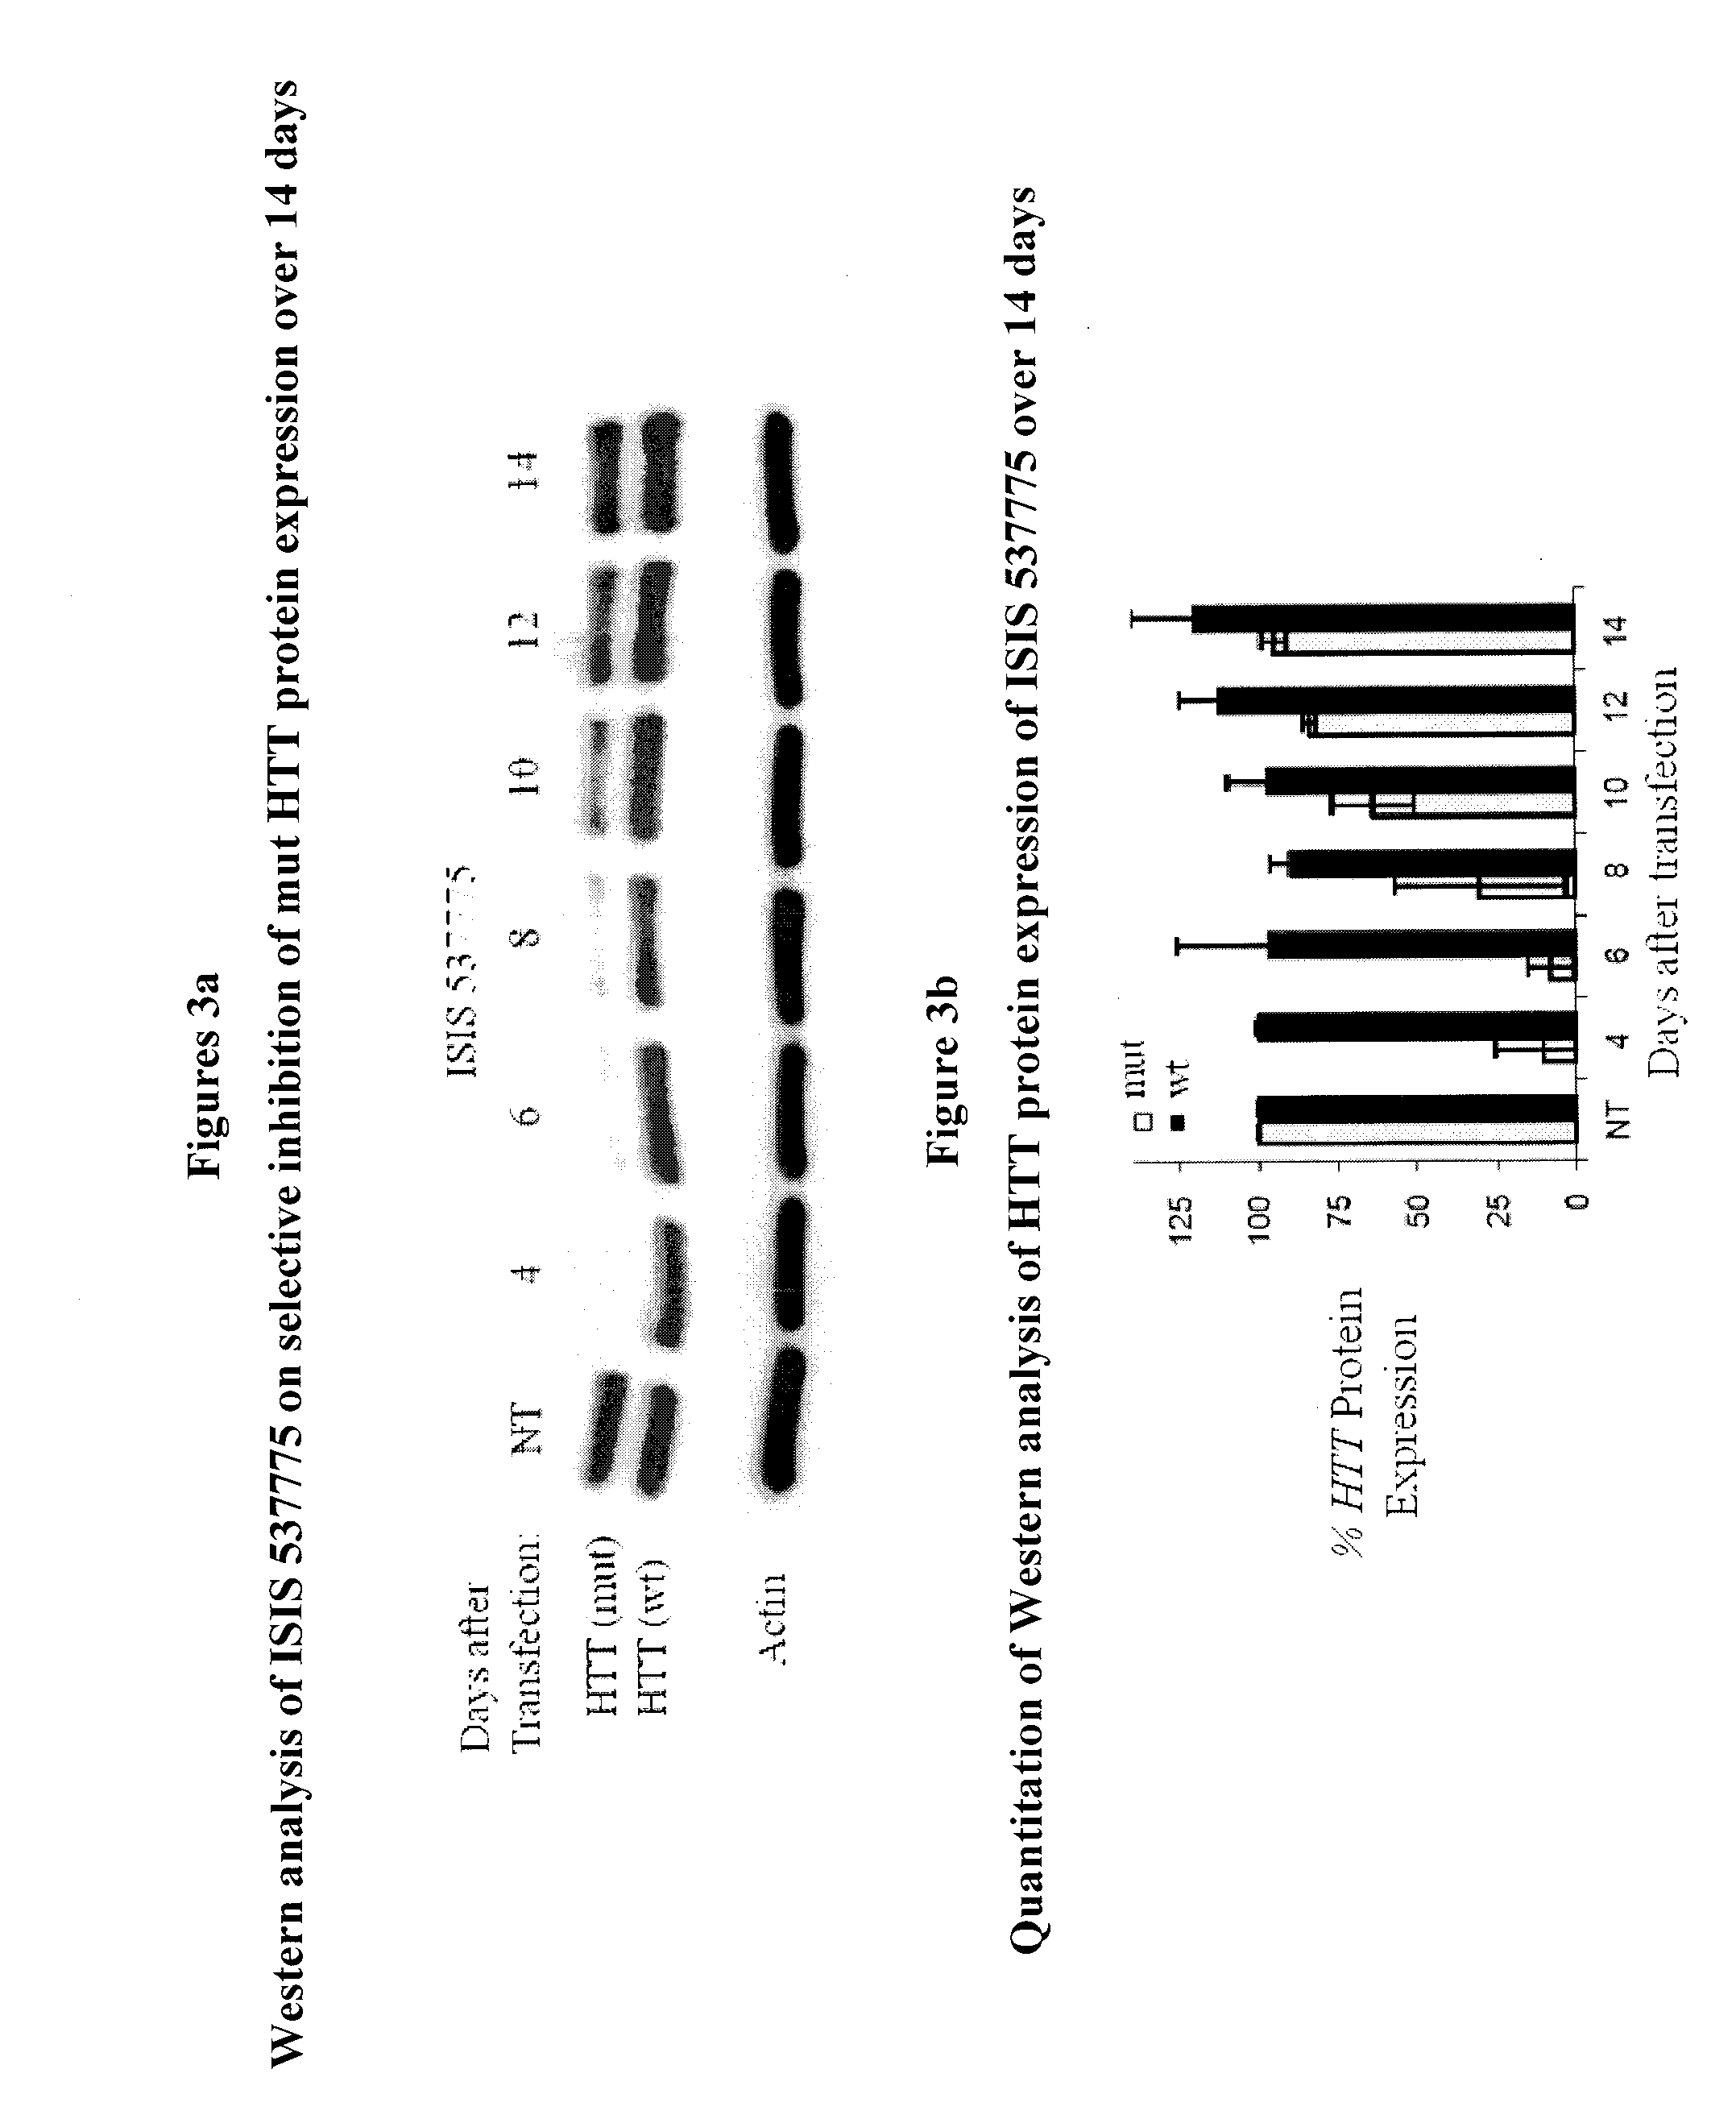 Methods and compounds useful in conditions related to repeat expansion